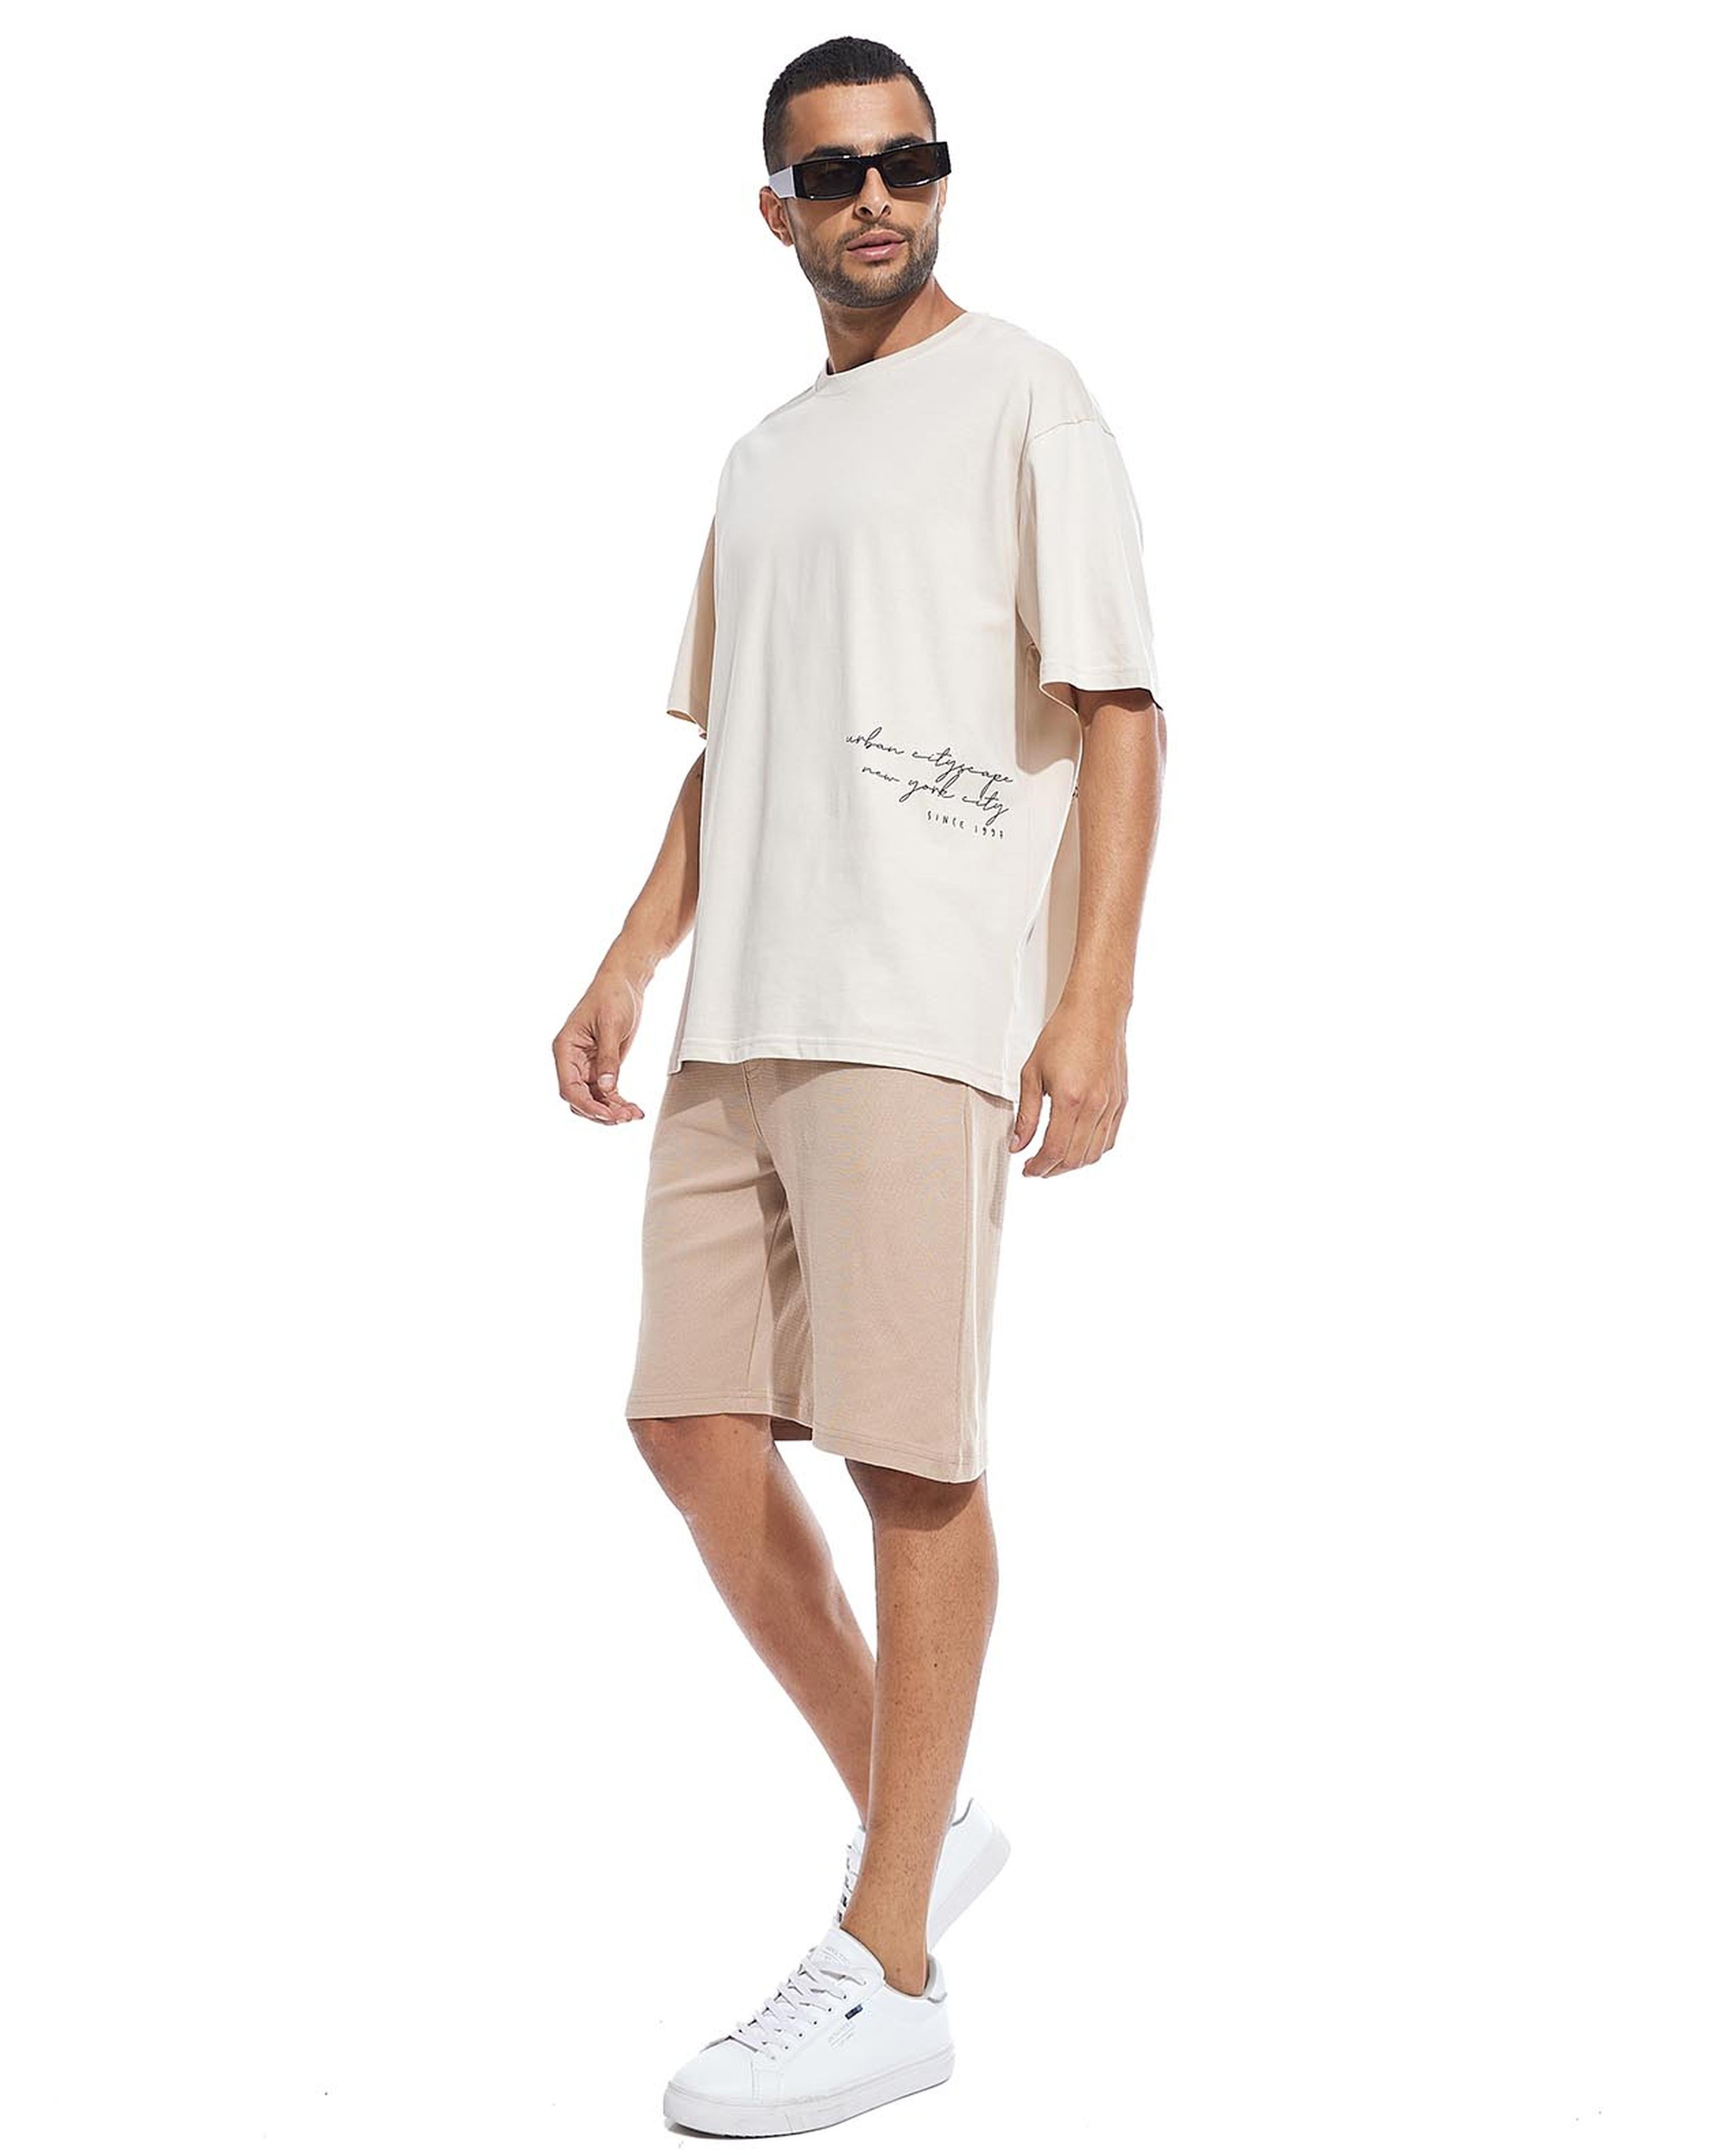 Placement Print Oversized T-Shirt with Crew Neck